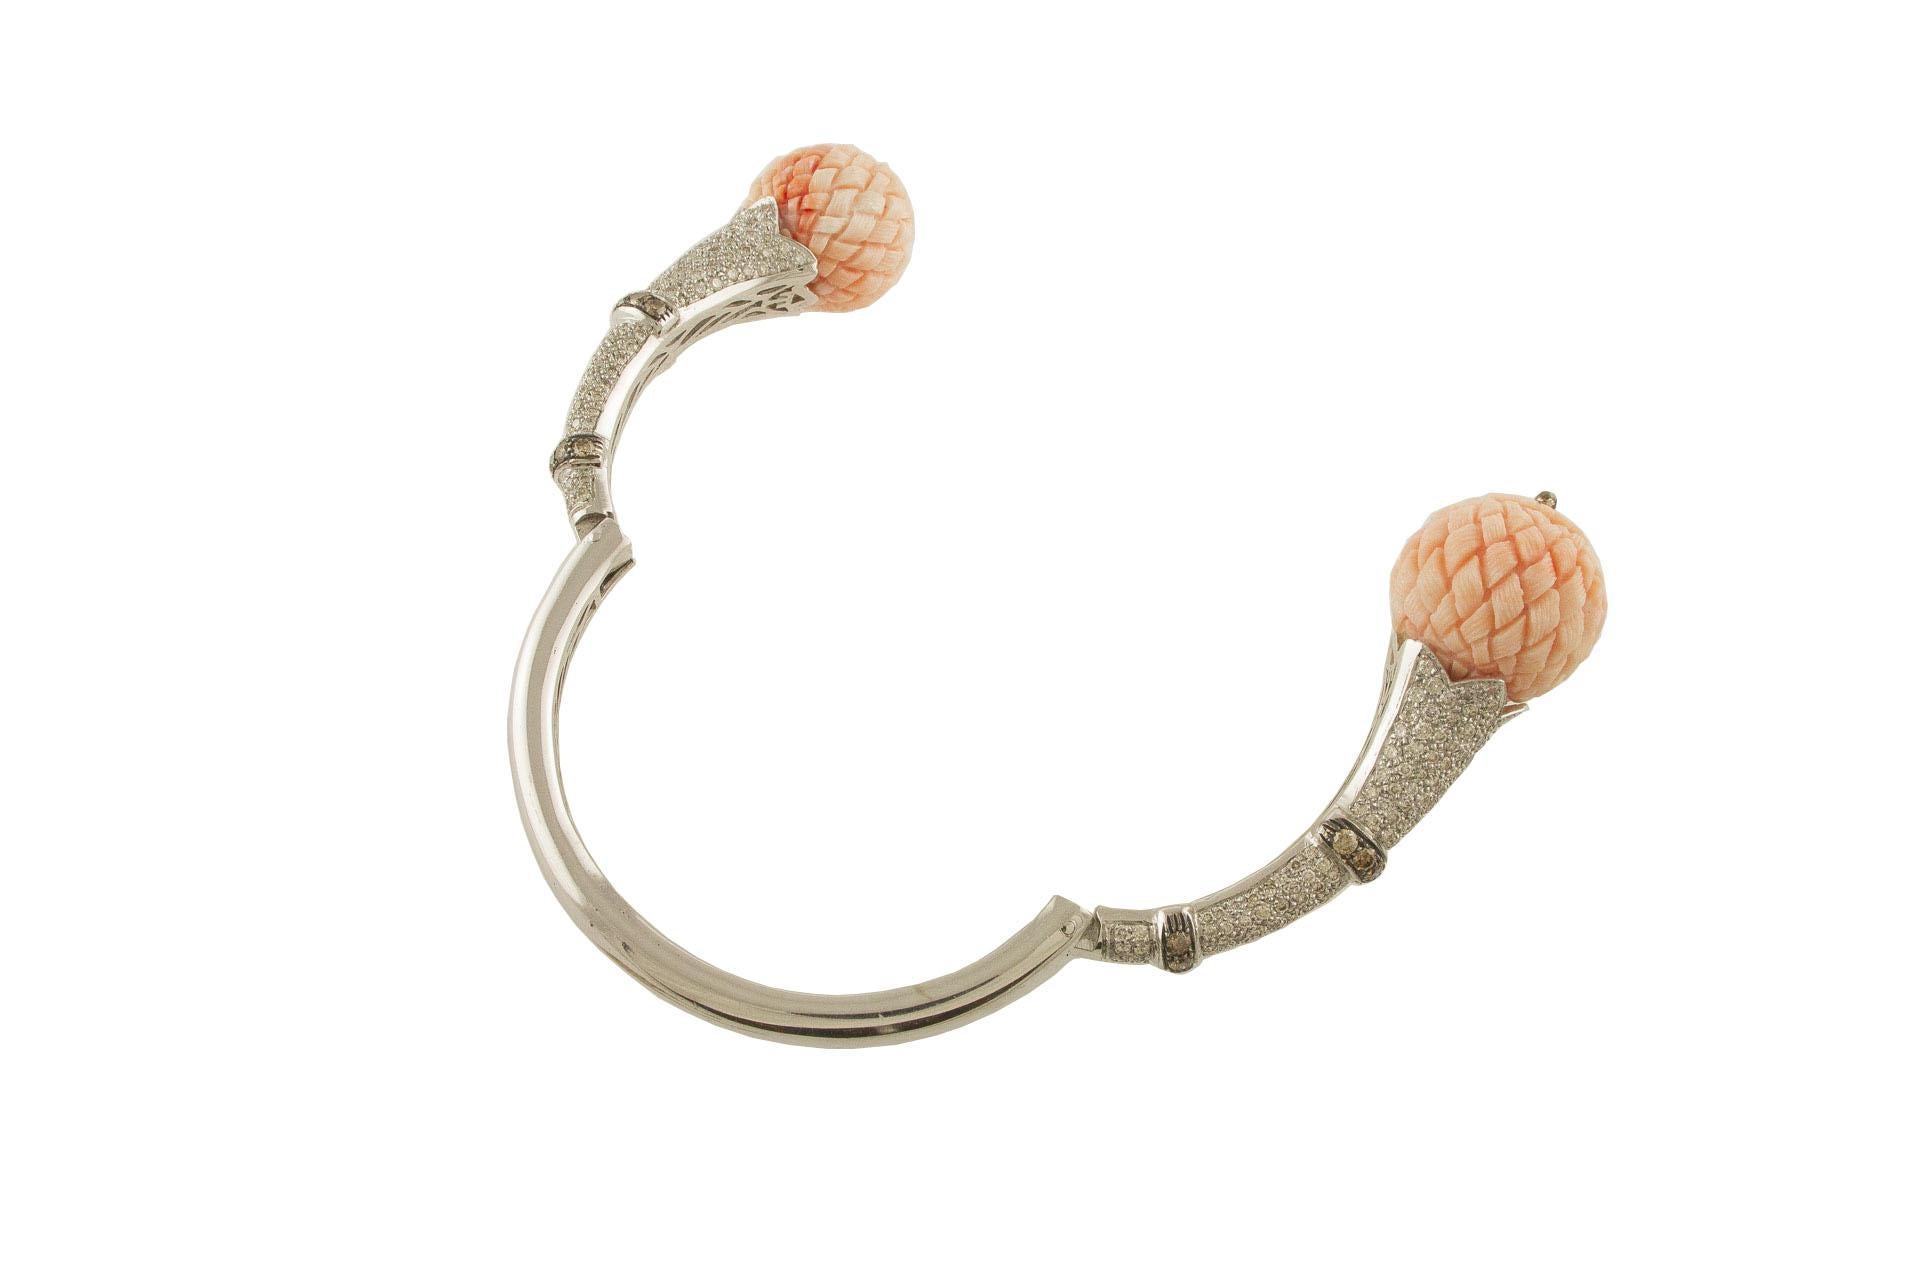 Retro White and Light Brown Diamonds, Engraved Pink Corals Spheres White Gold Bracelet